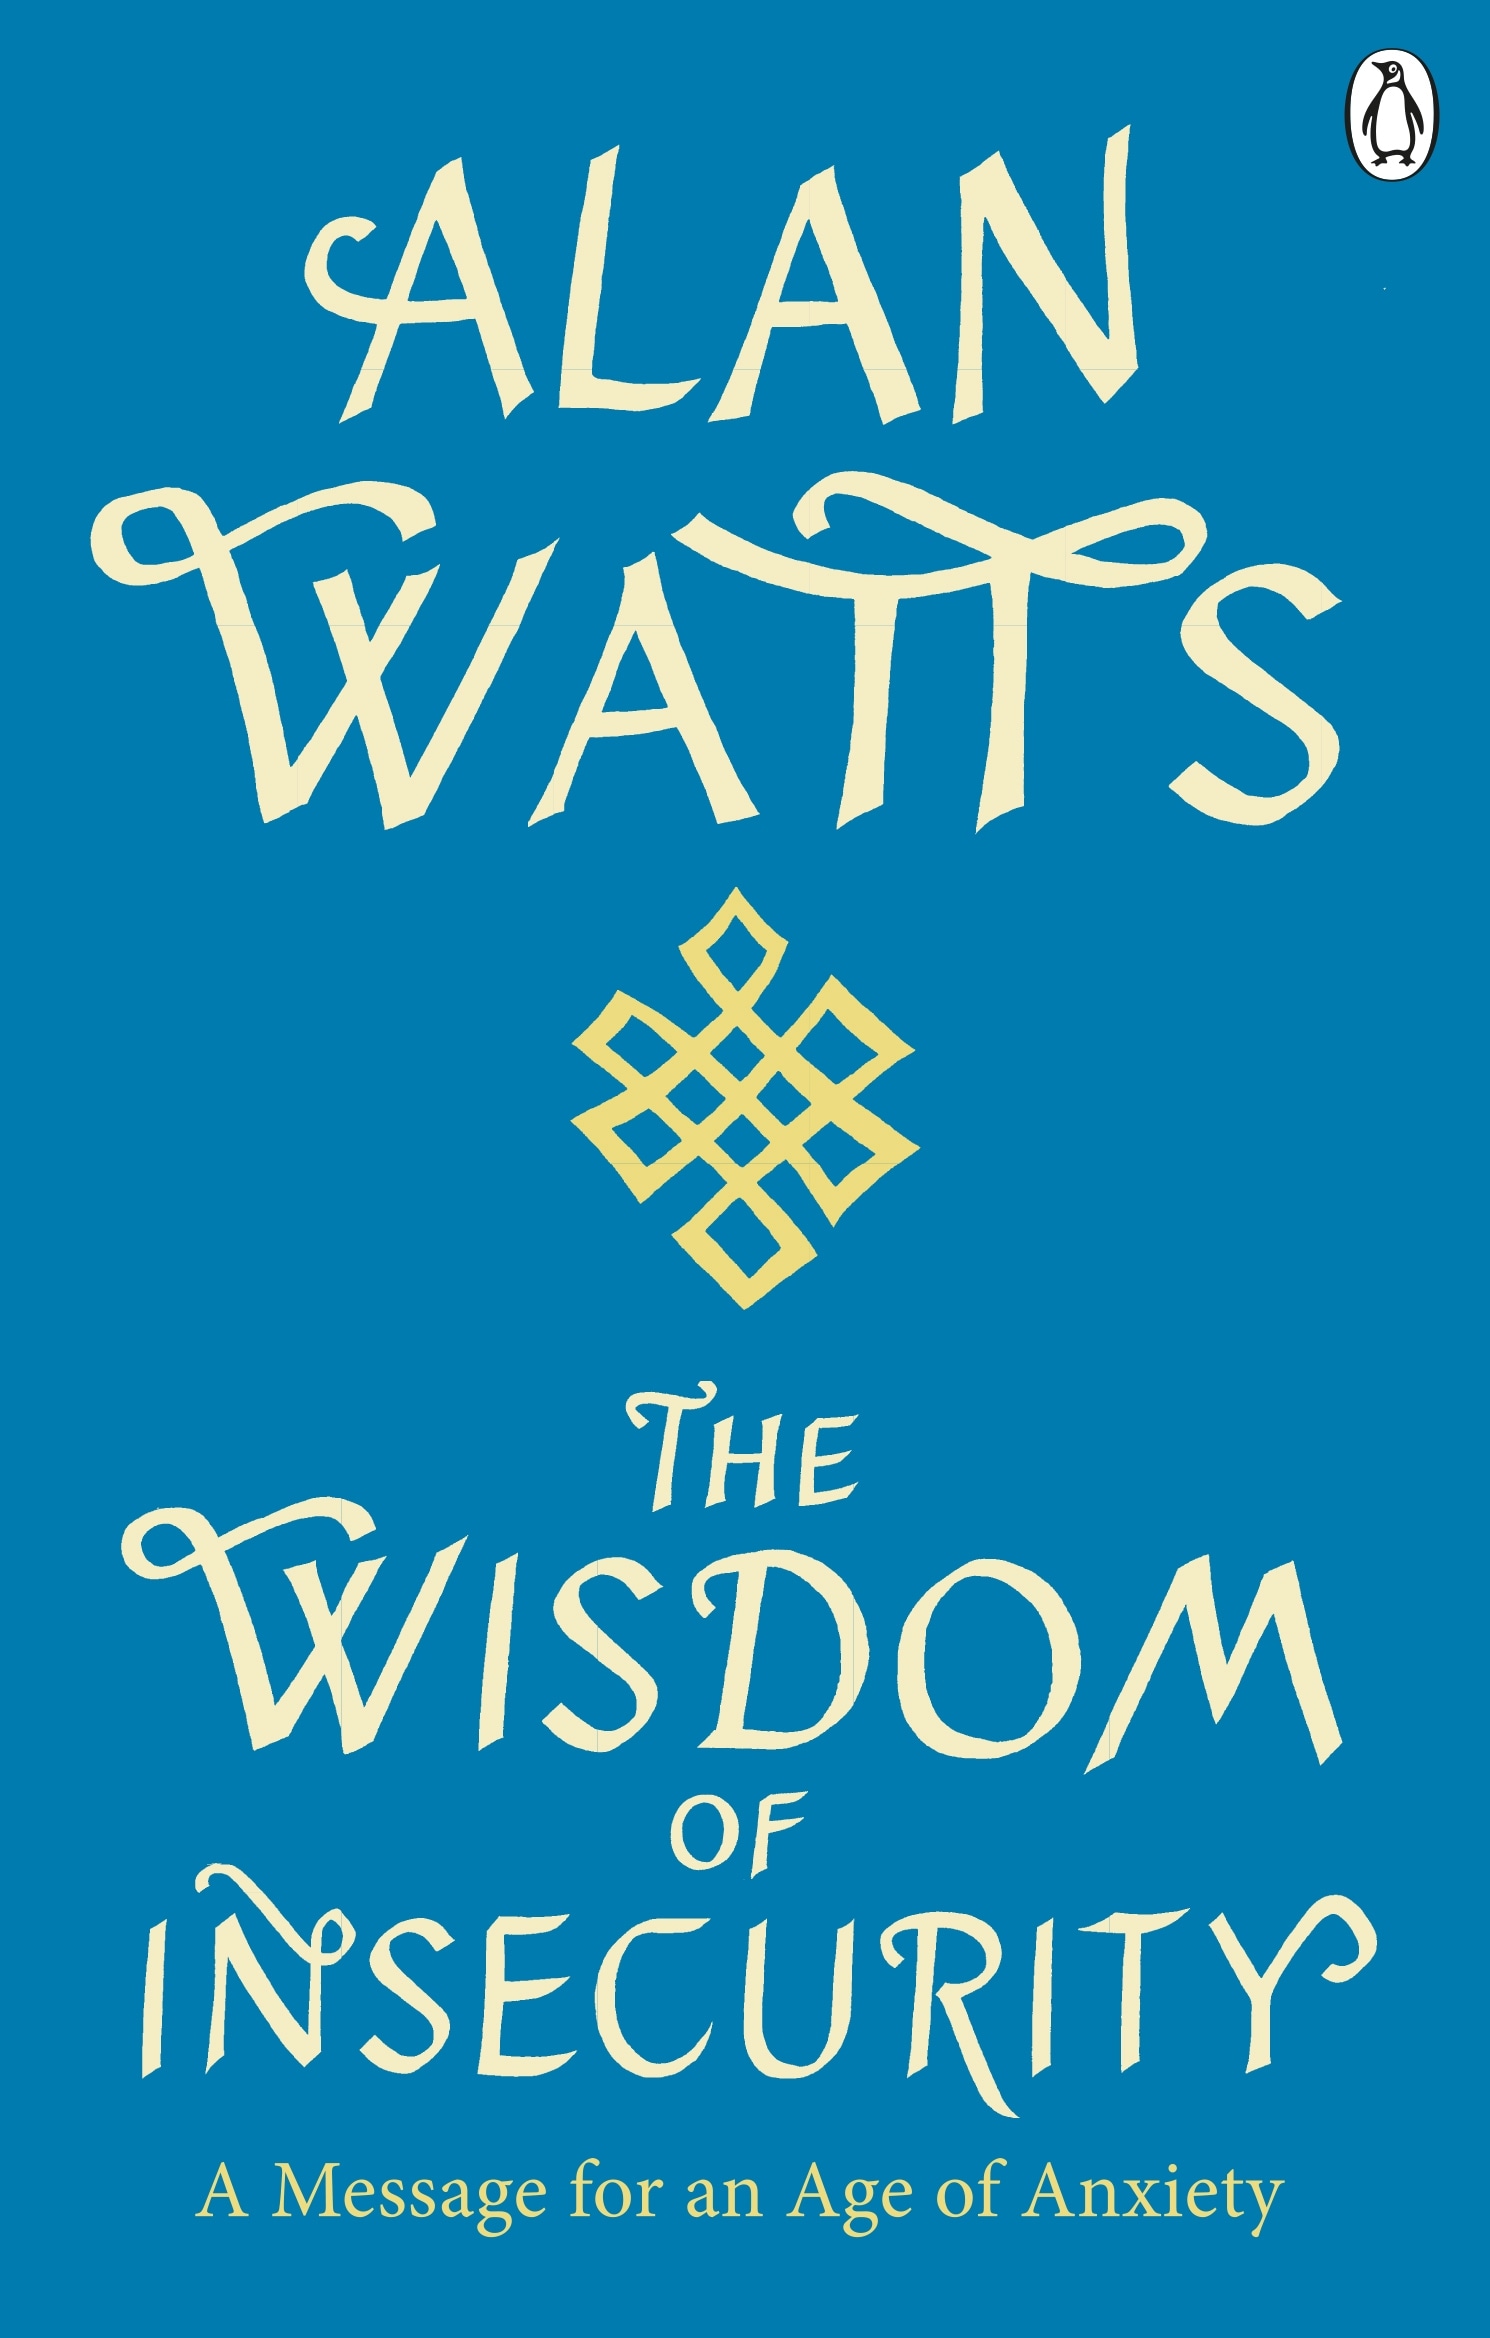 Book “Wisdom Of Insecurity” by Alan W Watts — July 1, 2021